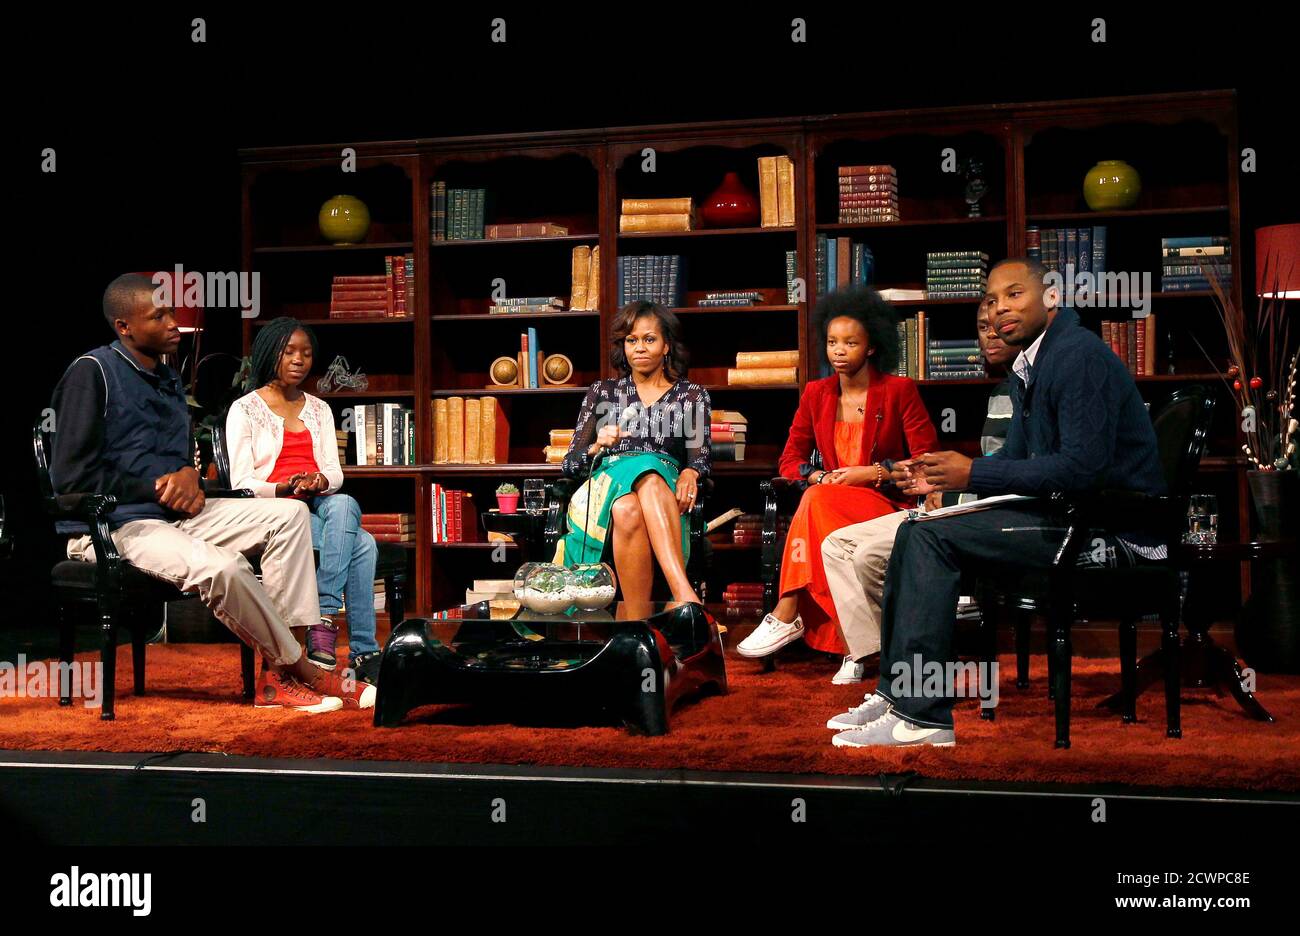 U.S. first lady Michelle Obama (C) joins participants (L-R) Tebogo Tenyane, 16, Miriam Kgokane, 10, Keamogetswe Rakhoadi, 11, Aubrey Baloyi, 12, and moderator Sizwe Dhlomo in a discussion event with youths at the Sci-Bono Discovery Centre in Johannesburg June 29, 2013. The first lady was joined by teenagers from across South Africa as well as U.S. students virtually, at the event organized in conjunction with MTV Base, an African youth and music TV channel, and Google Plus. REUTERS/Thomas Mukoya (SOUTH AFRICA - Tags: POLITICS EDUCATION) Stock Photo